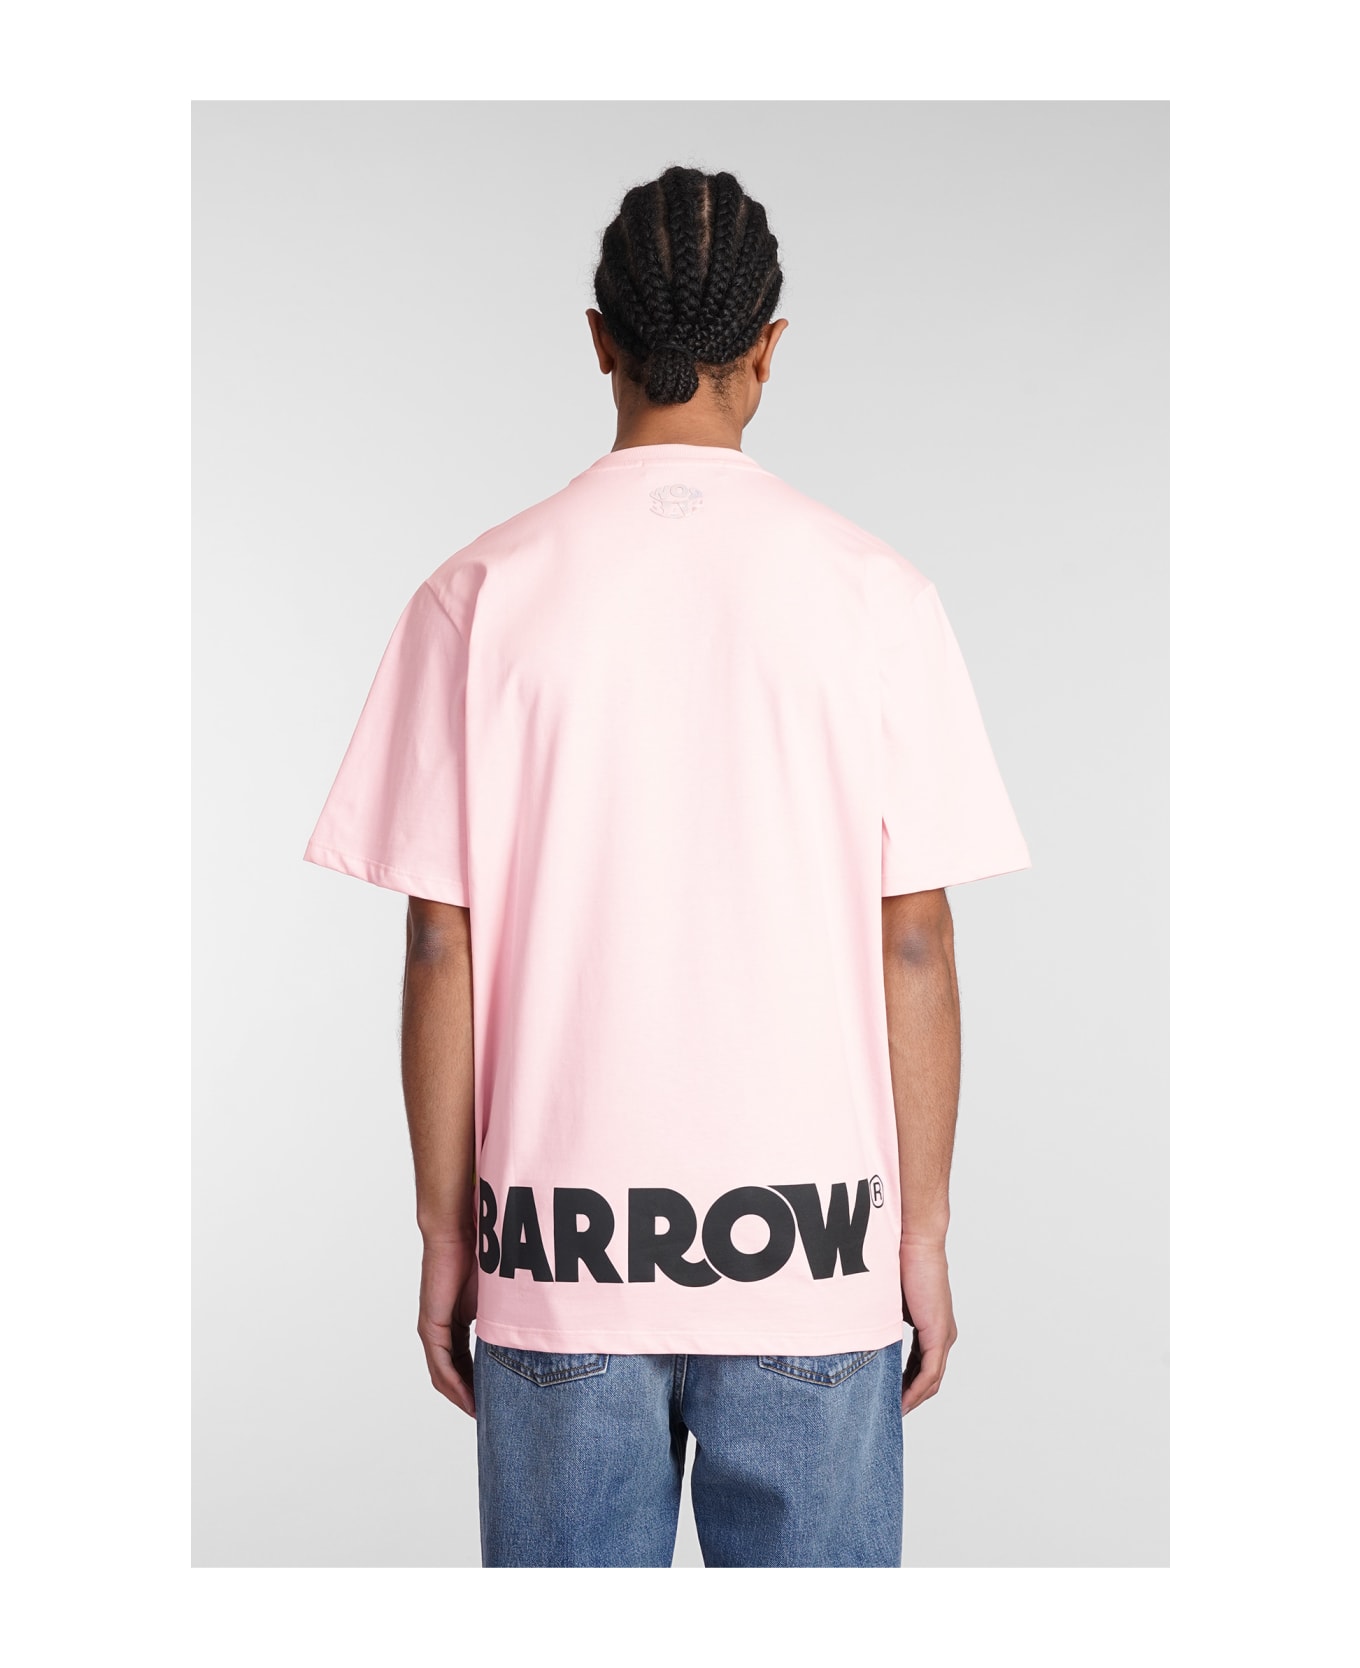 Barrow T-shirt In Rose-pink Cotton - rose-pink シャツ